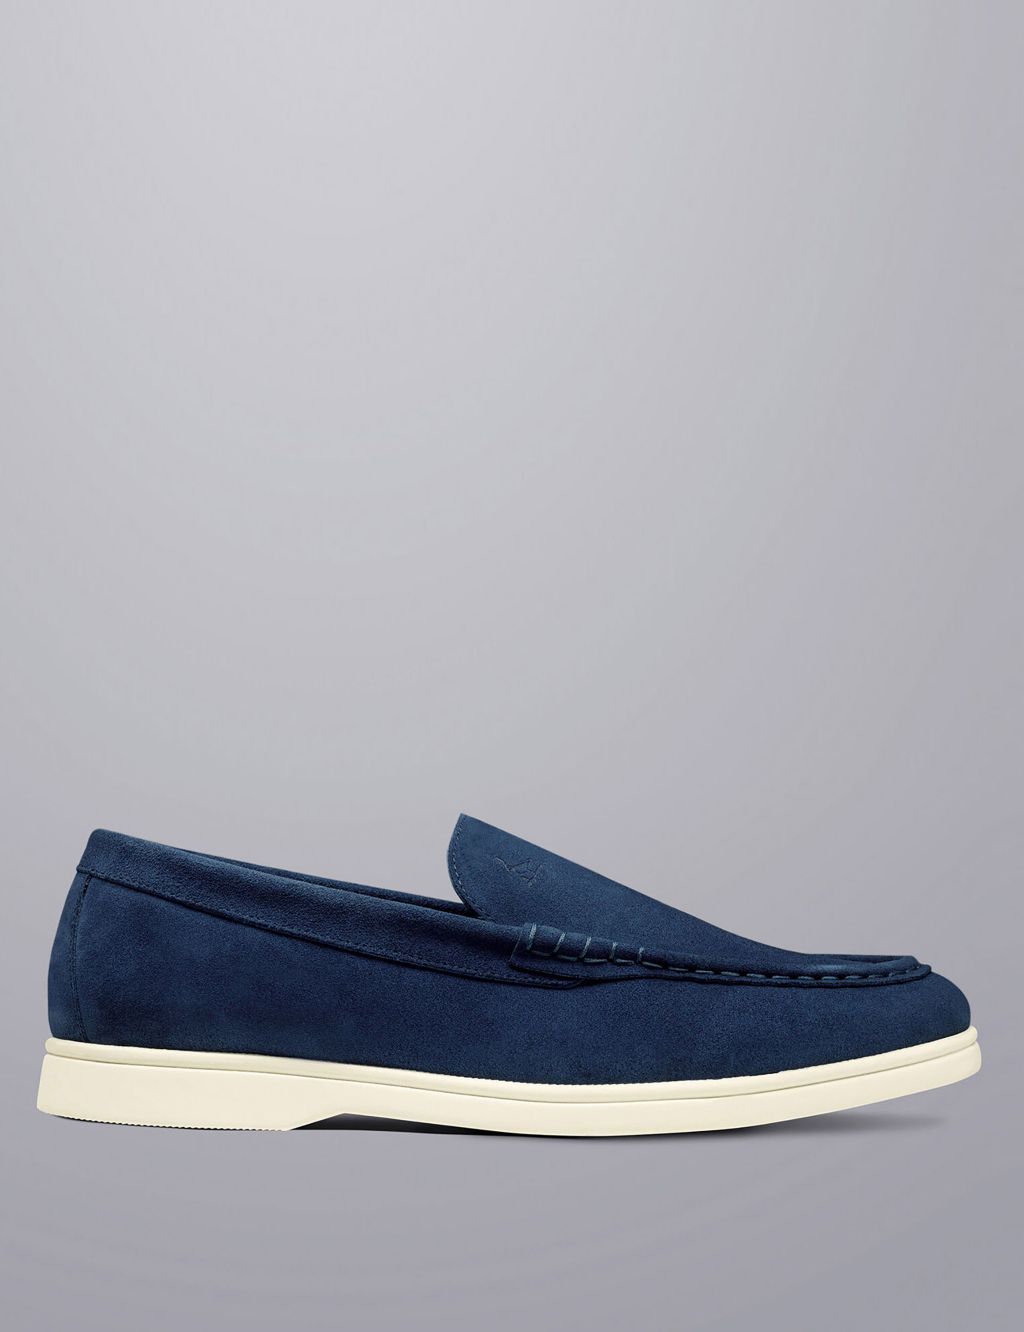 Suede Slip On Shoes image 1